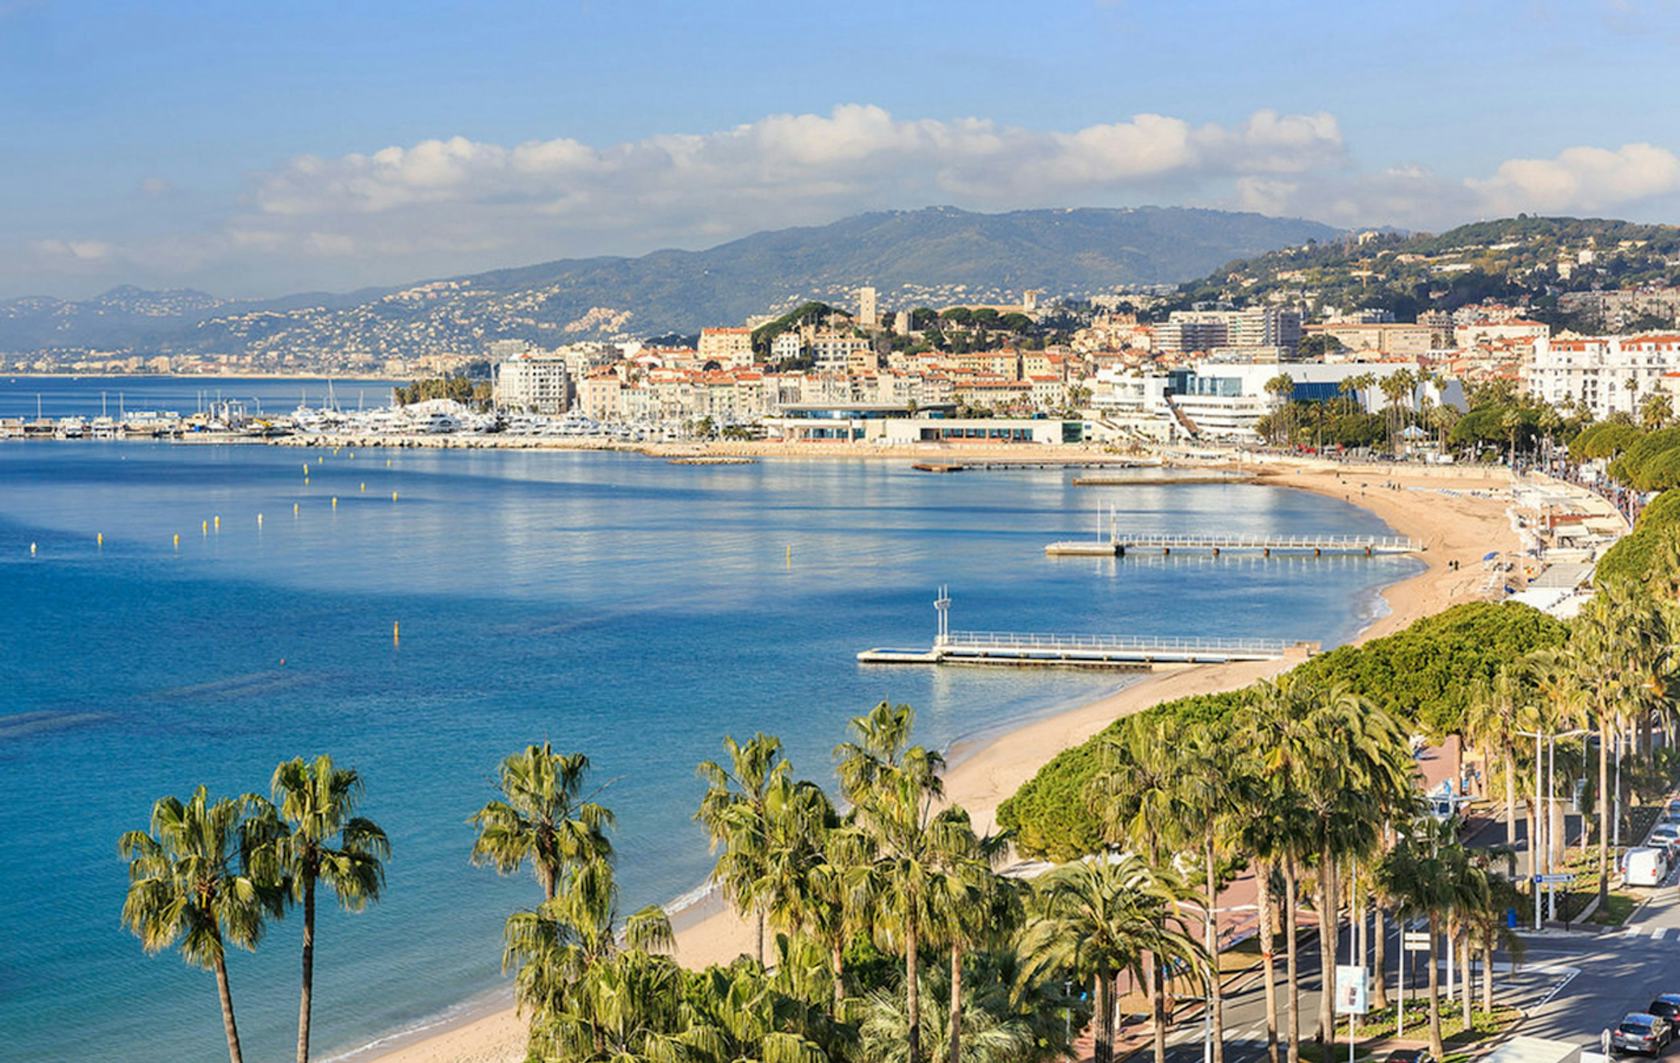 Why invest in Cannes?